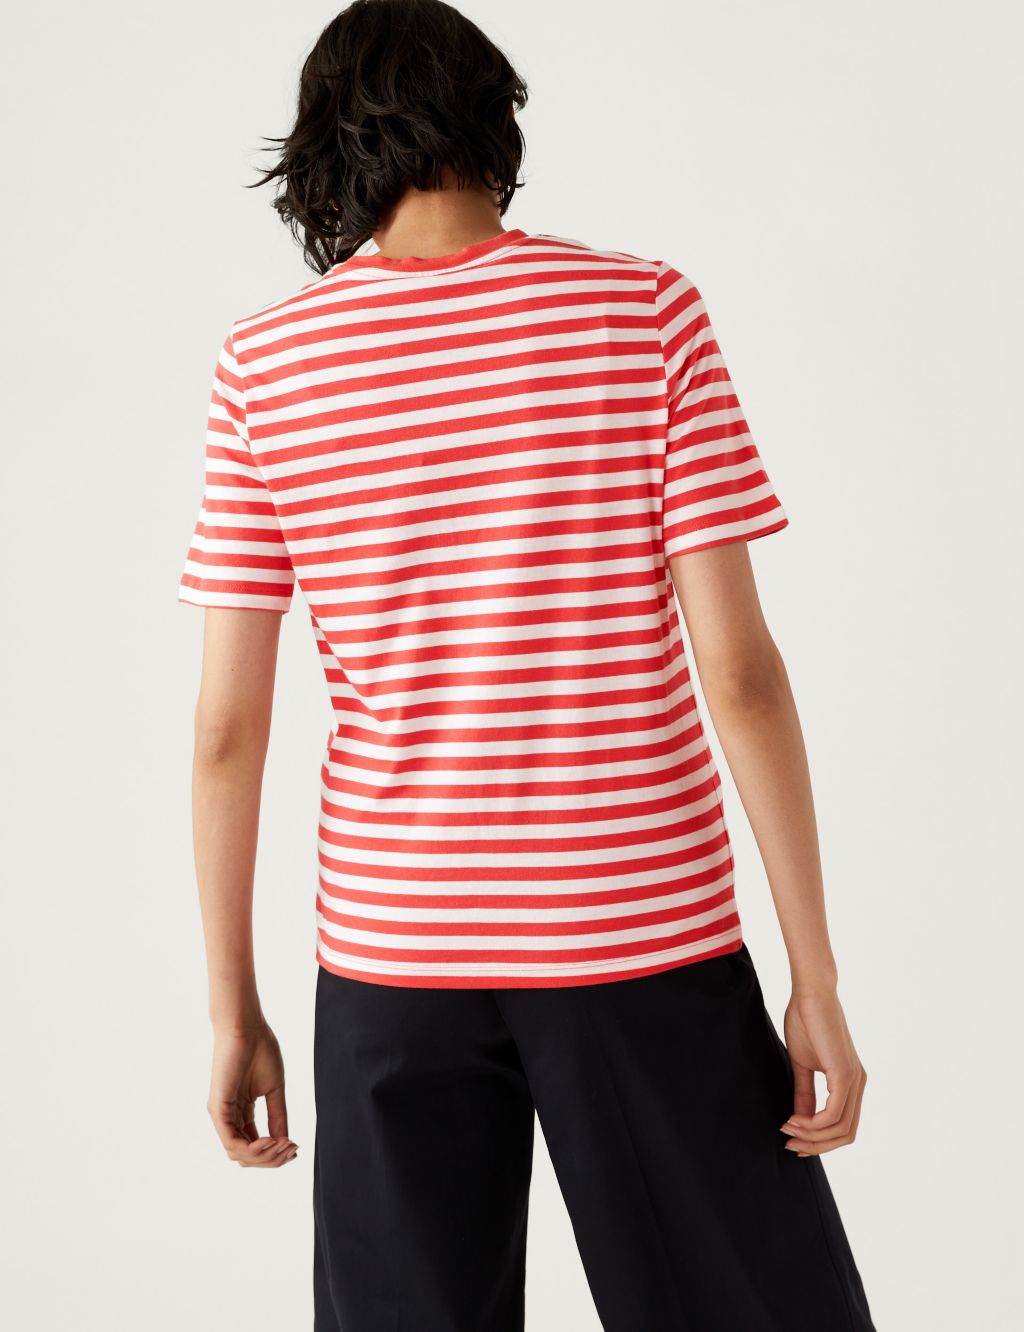 Pure Cotton Striped Everyday Fit T-Shirt image 5